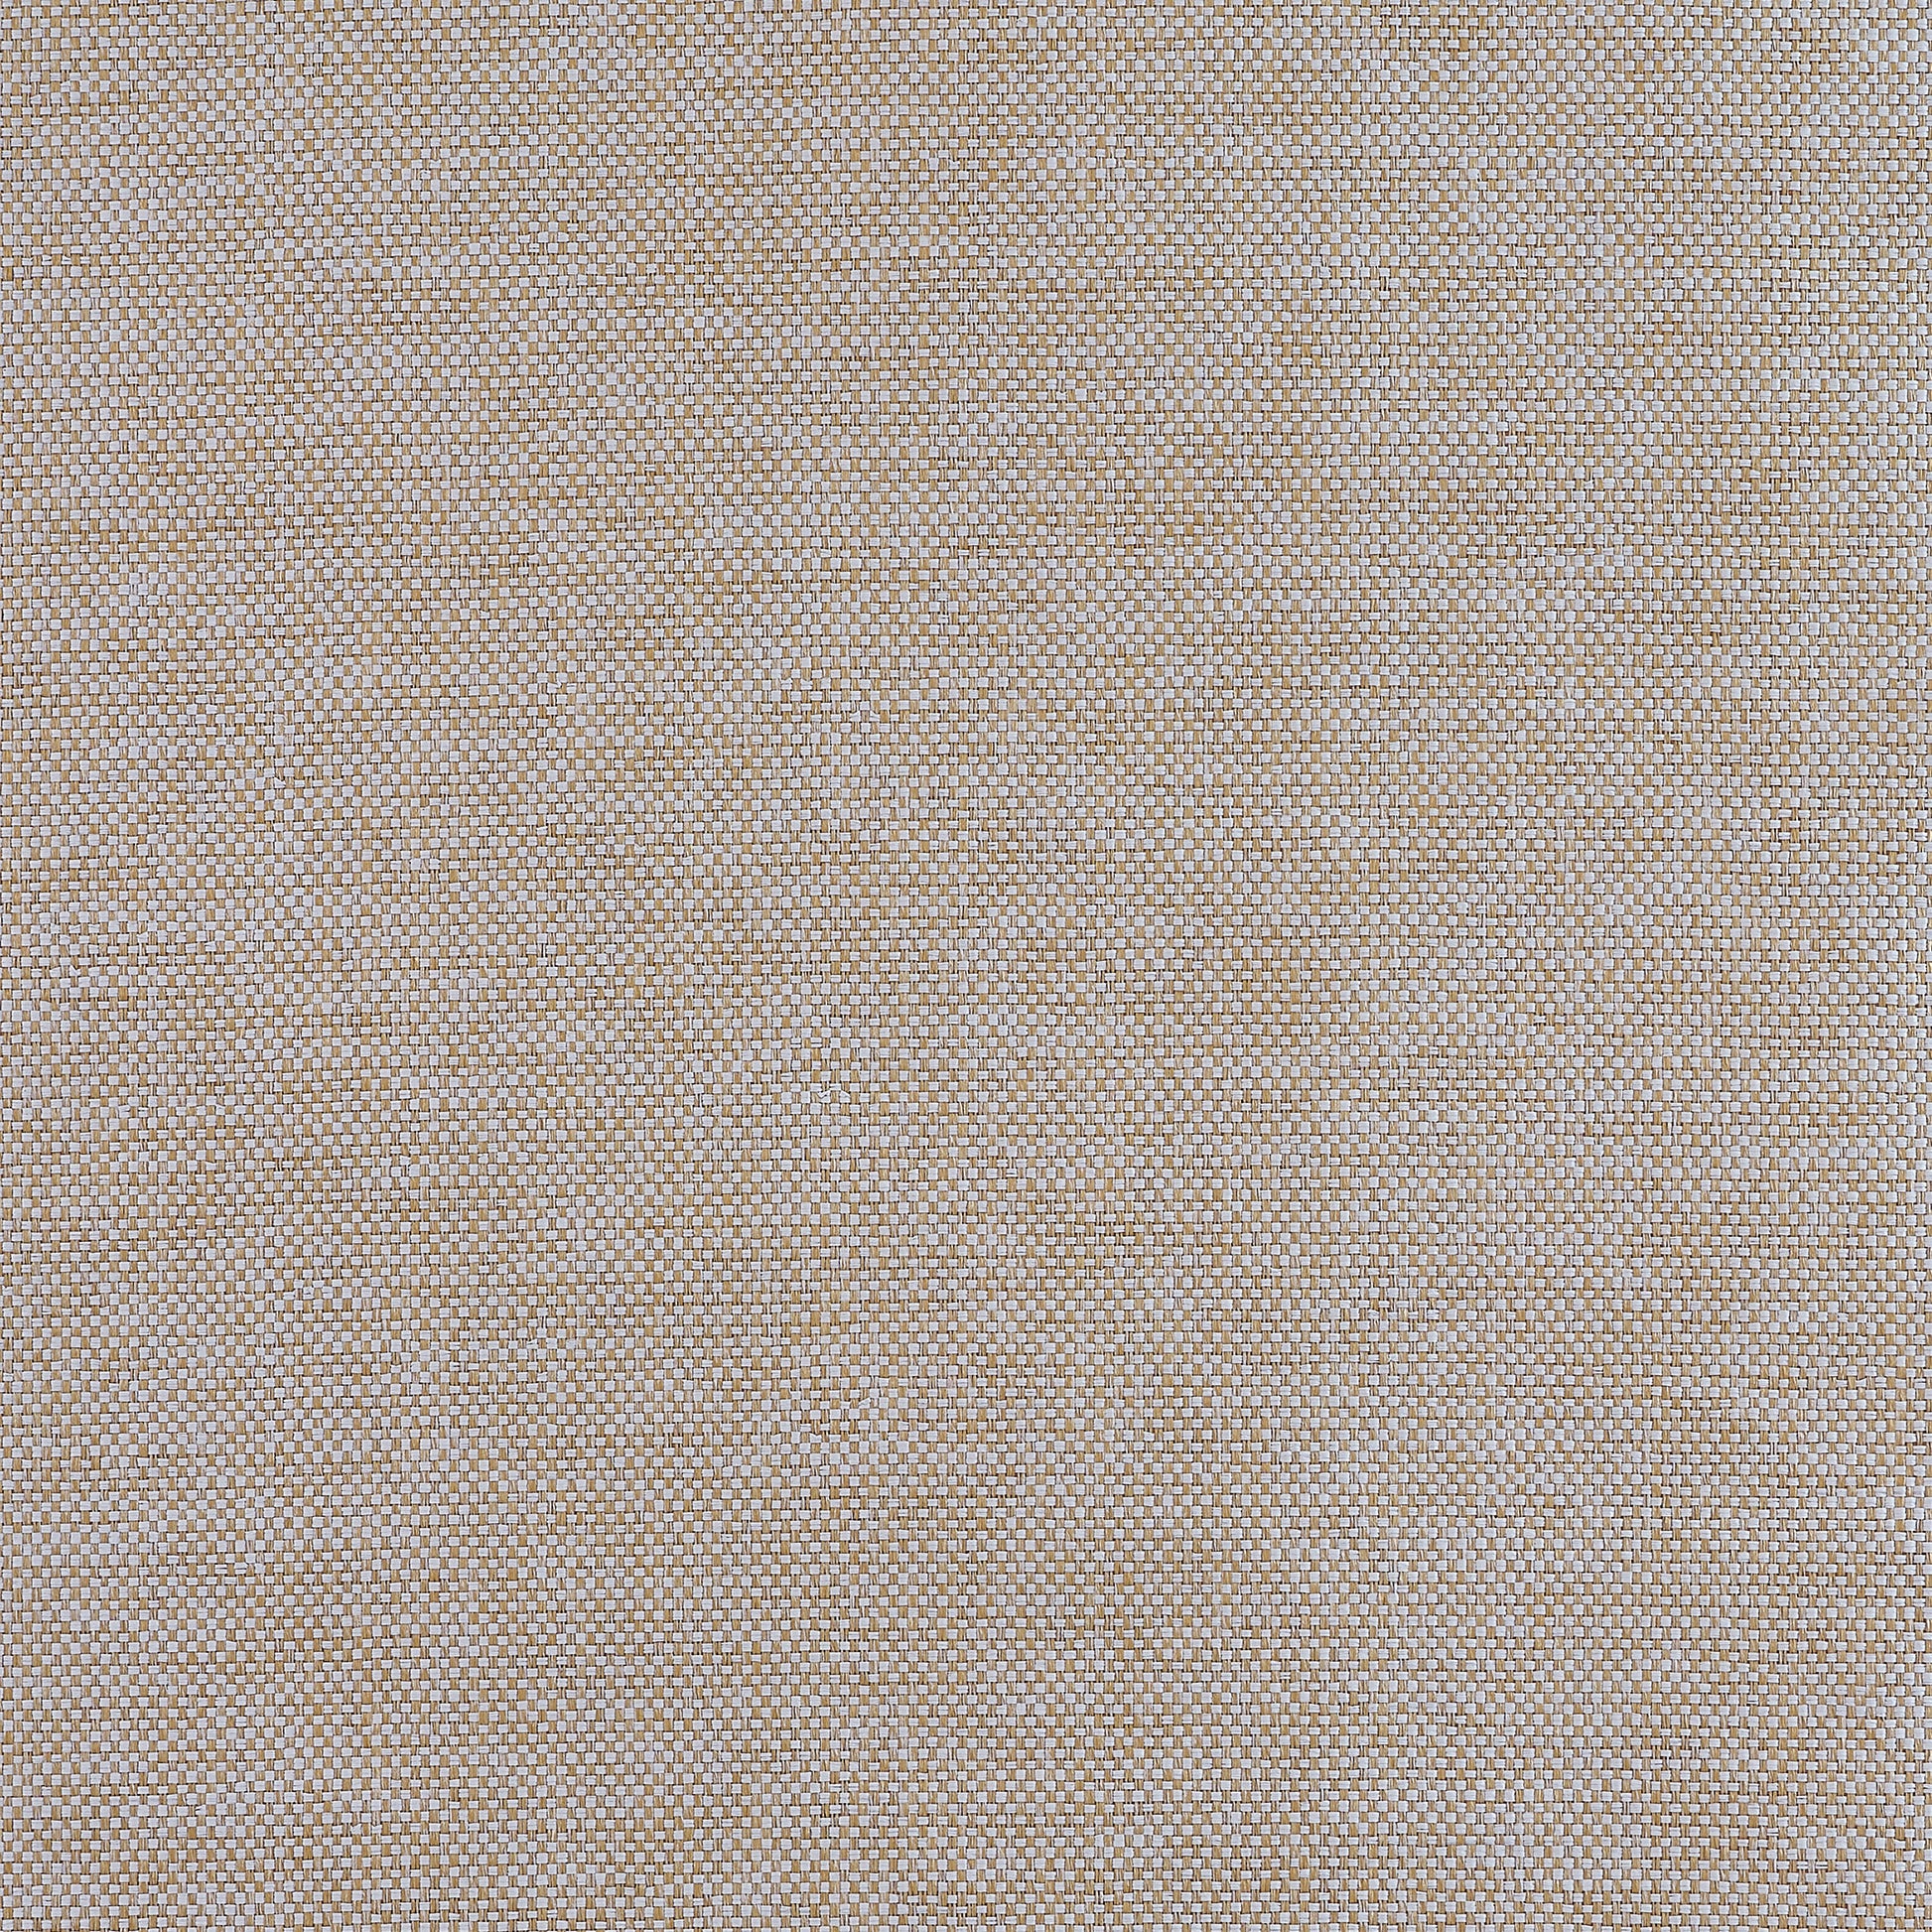 Purchase Thibaut Wallpaper Product# T19691 pattern name Clarkson Weave color Grey Blend. 